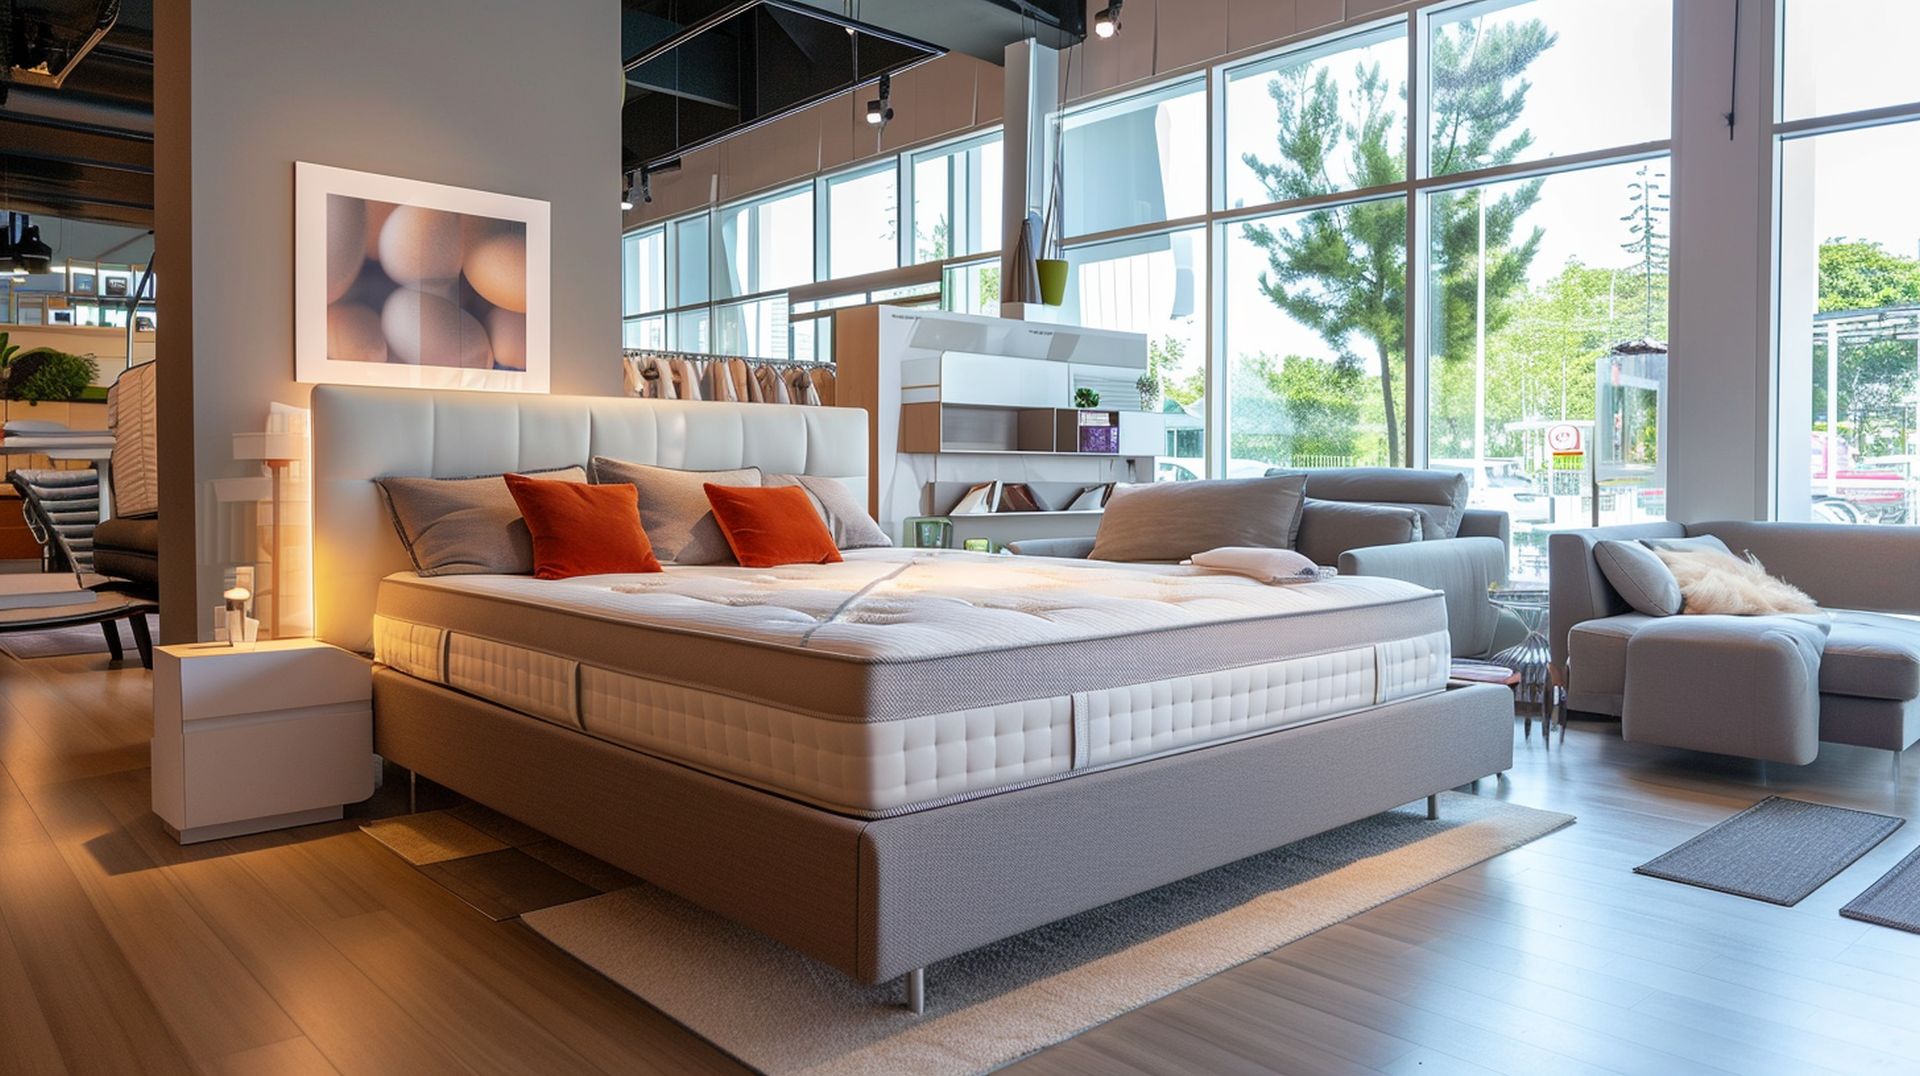 If you're looking for a new bed, mattress stores in South Weymouth offer the best customer and delivery service, financing, and warranties in Massachusetts